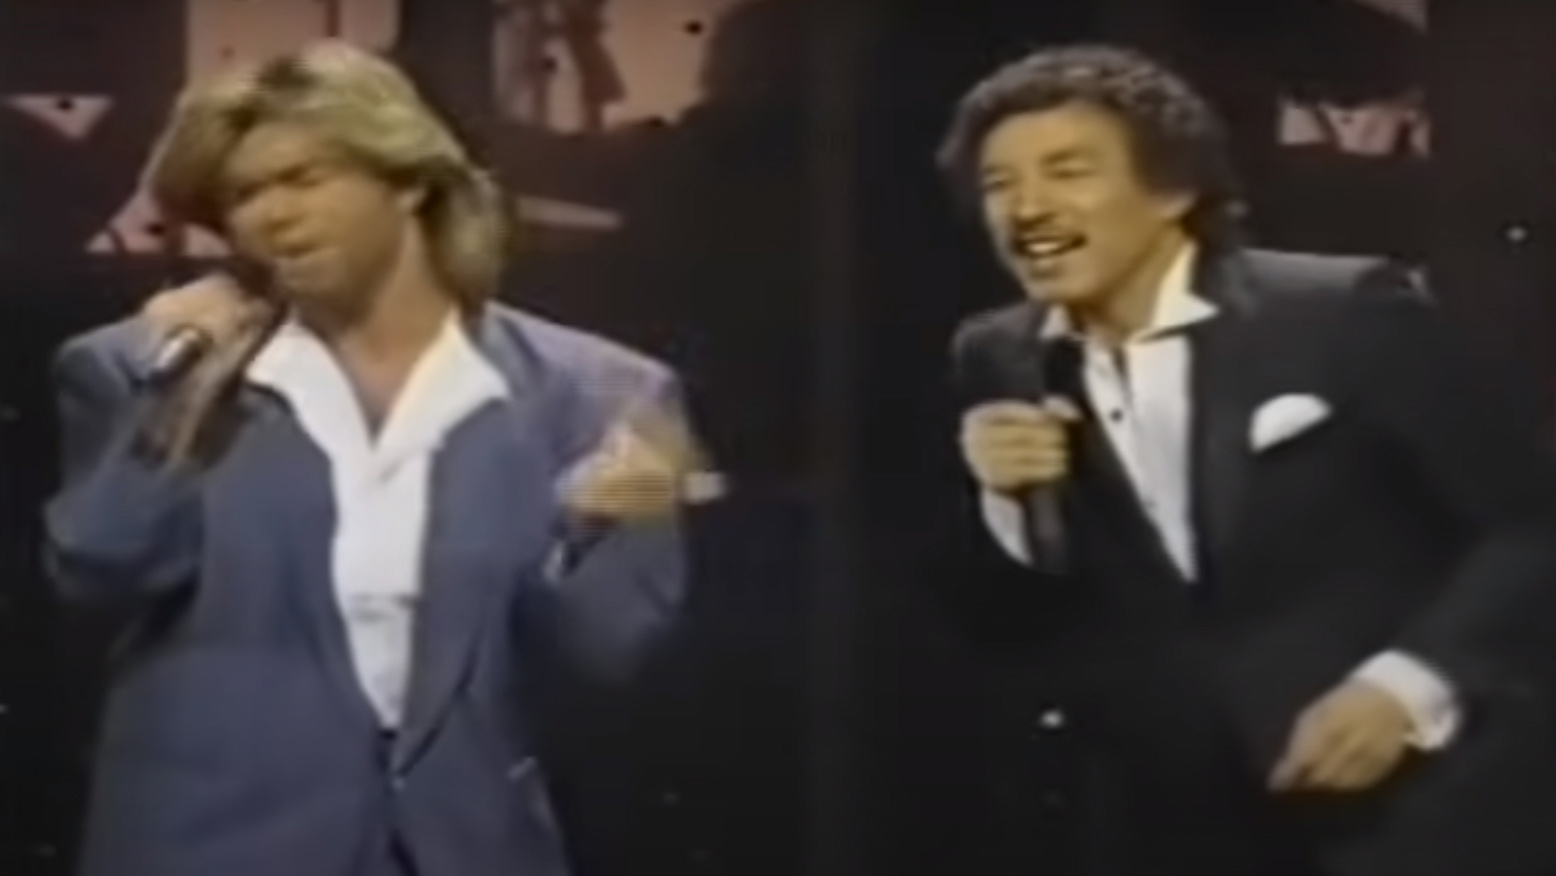 Relive the moment 21-year-old George Michael duetted with Smokey Robinson on 'Careless Whisper'